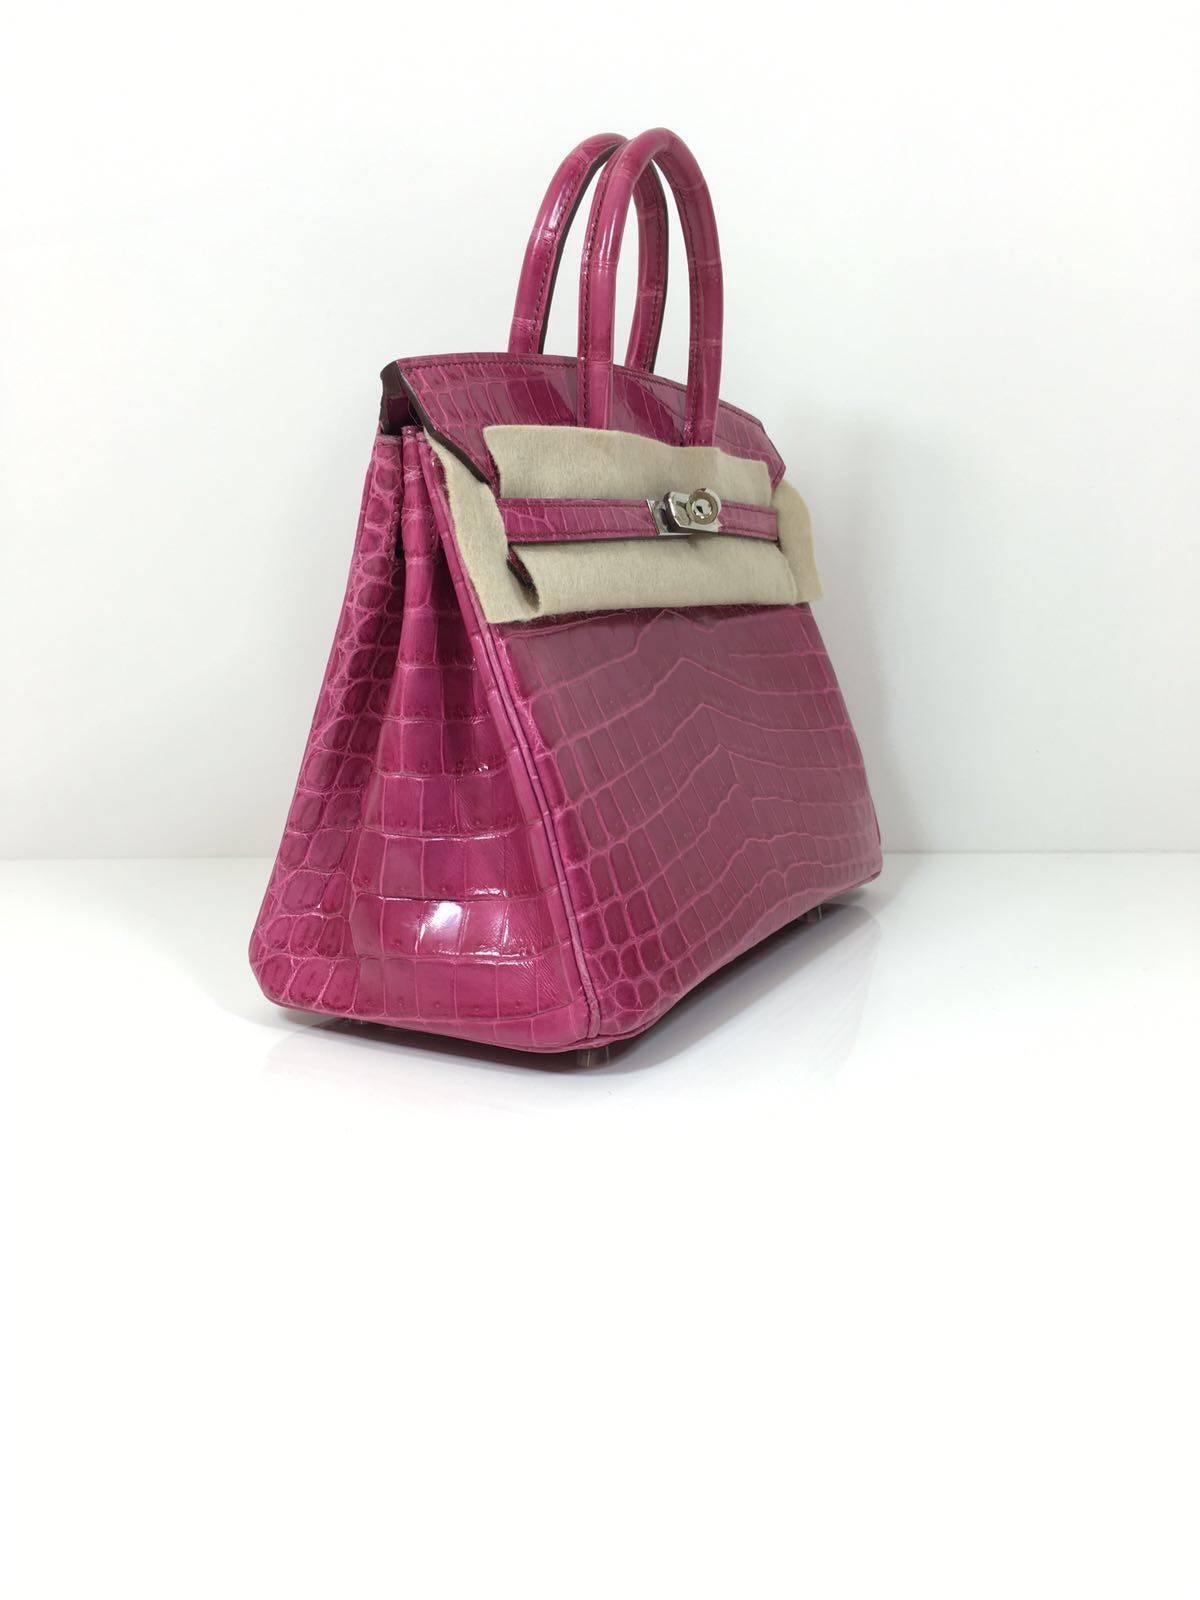 rare Hermes Birkin size 25
exotic leather crocodile niloticus
color fushia
palladium hardware
store fresh, comes with receipt and full set (dust bag, box, cities...)
Hydeparkfashion specializes in sourcing and delivering authentic luxury